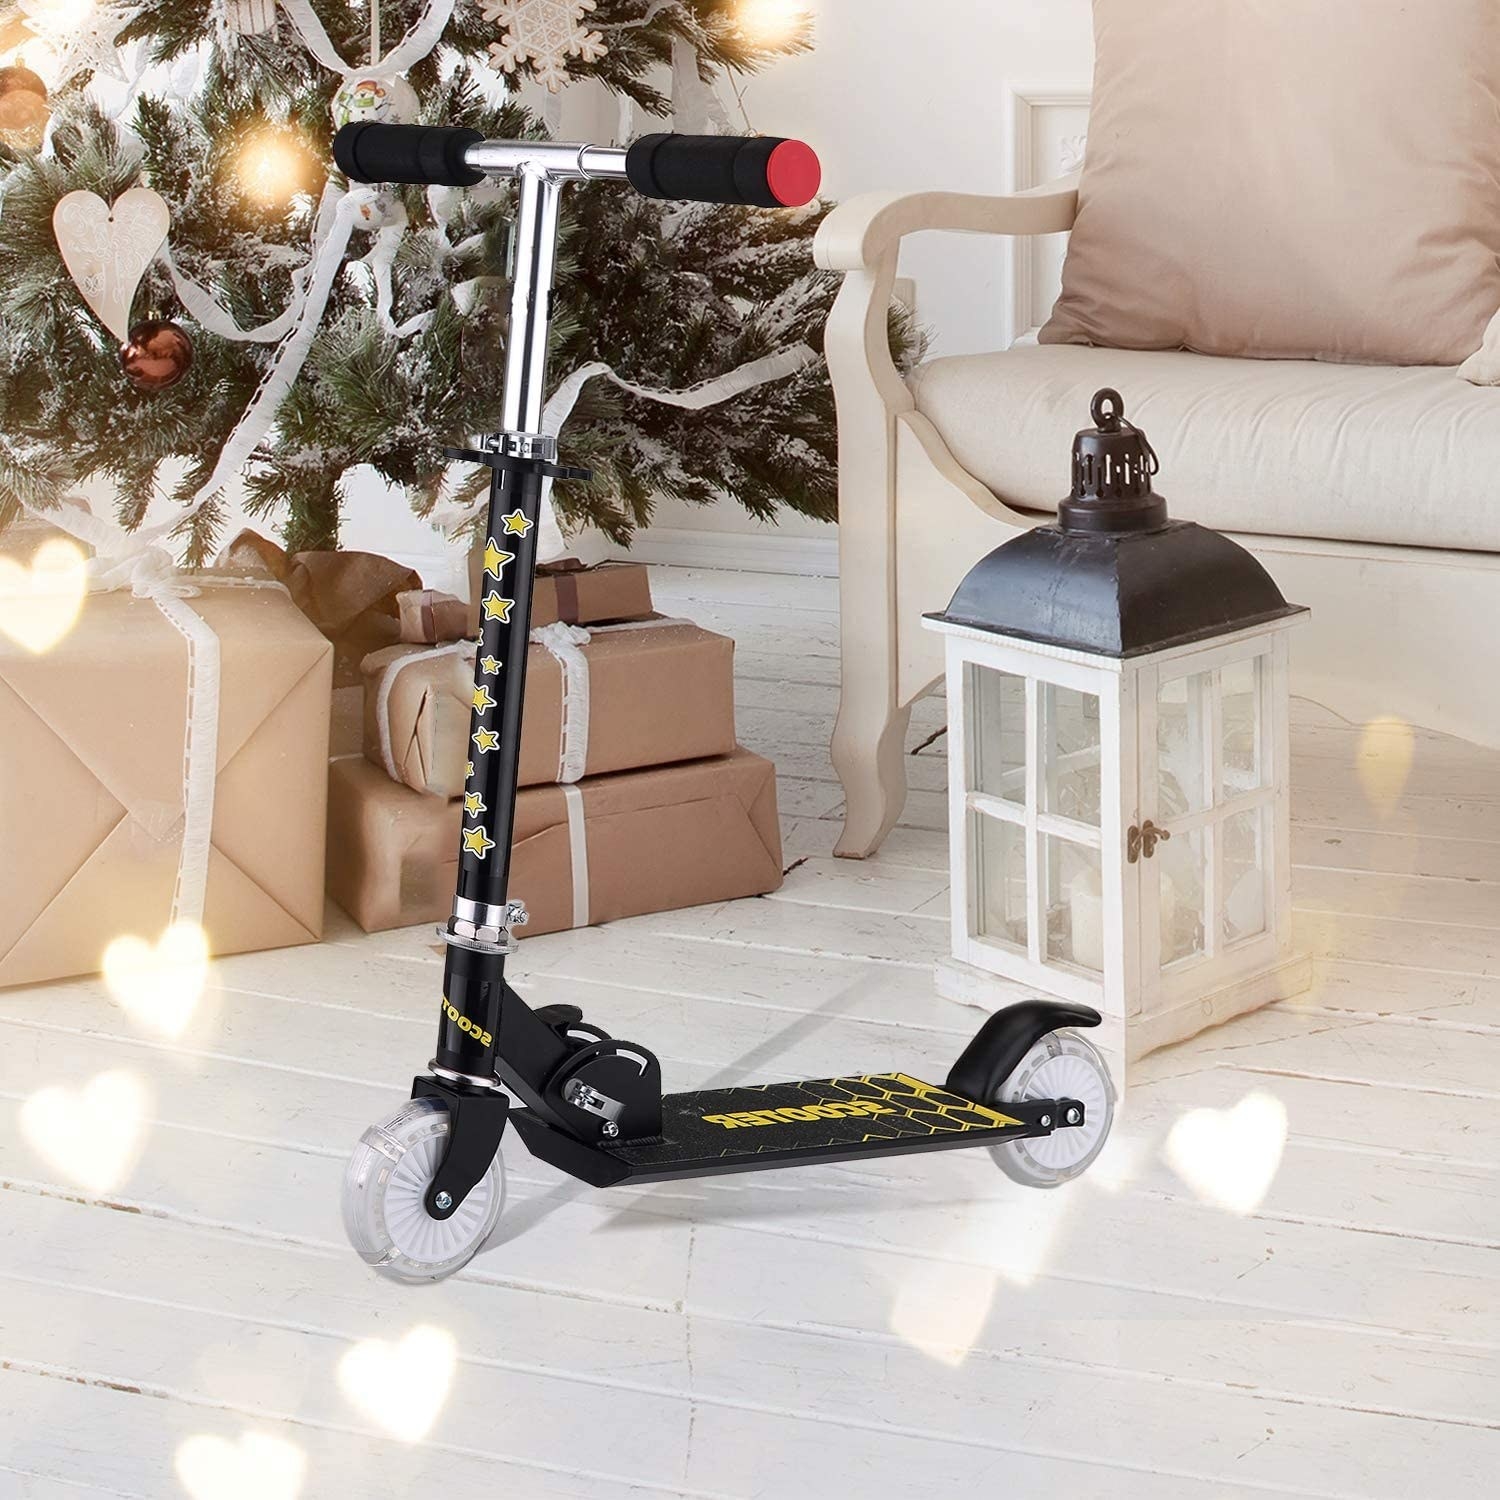 A scooter next to a Christmas tree